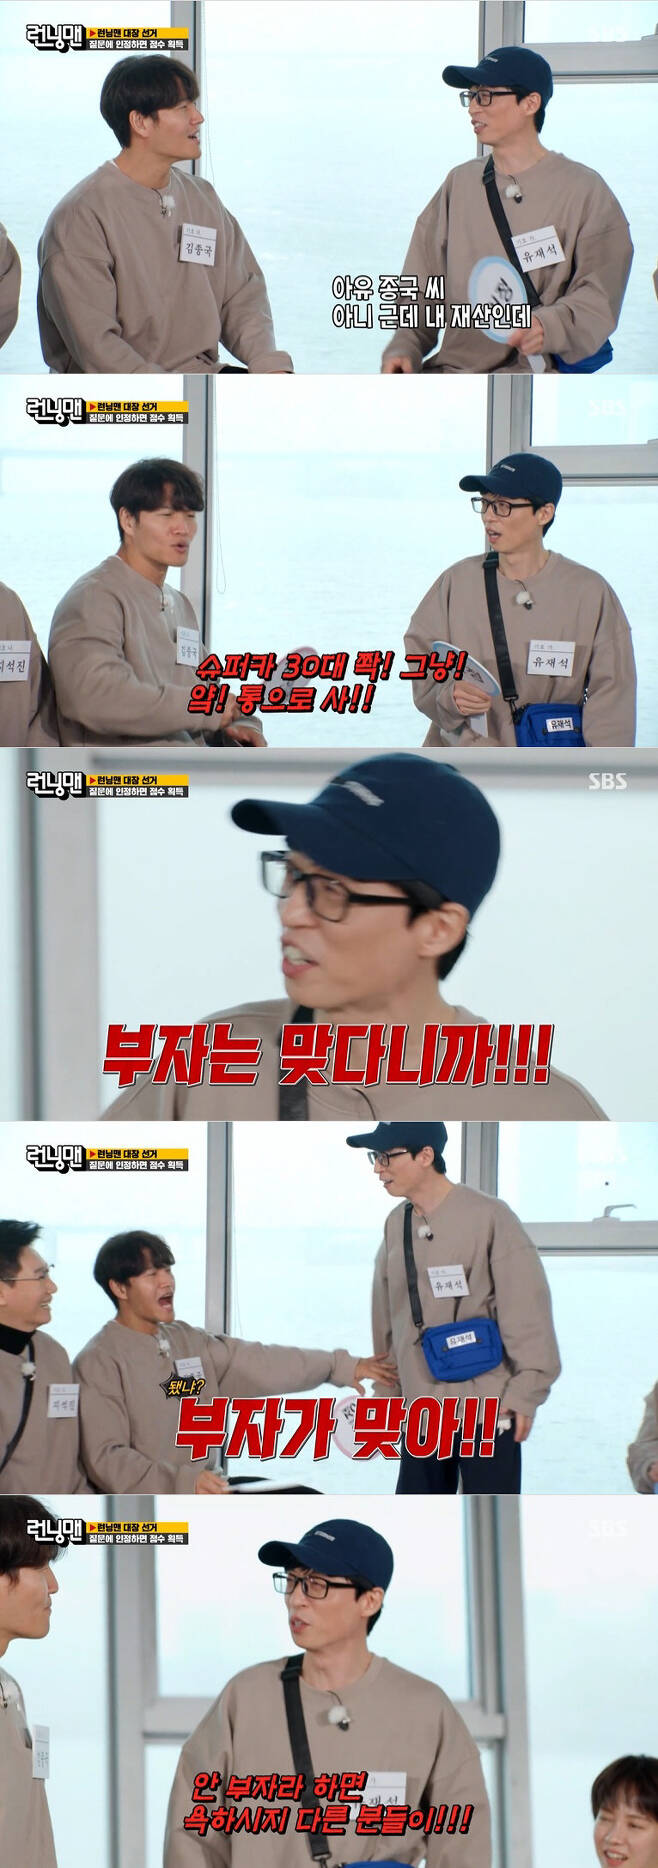 SBS Running Man Yoo Jae-Suk is in danger of revealing propertyRunning Man, which was broadcast on the 6th, kept the top spot in the same time zone with 3.2% of the target index 2049 ratings (hereinafter based on Nielsen Korea metropolitan area, households), and the highest audience rating per minute jumped to 7.9%.On this day, the members met in full in five weeks due to Corona 19, and they were happy to show off their high tension from the opening, but they attracted attention by mentioning what do you do when you play.What do you do when you play?, Running Man , due to the confirmation of the members, the recording schedule was changed, and Kim Jong-kook, who encountered it, said, What do you do when you play, is the main PD from Anyang?Yoo Jae-Suk said, I told you to go out of what do you play and I do it here.On this day, Race was decorated with Captain Election Race, which selects Running Man for four weeks, and comedian Jo Se-ho was a guest.When you become the Running Man captain, you will be marked for a month as Running Man of OOO. You will receive a special treatment for age notices, a lunch menu decision on the same day, a gift of luxury bottled water during recording, and a raise in the performance fee.However, during the term, you should participate in the production team meeting held at Mokdong SBS once a week to provide ideas.The first mission was a game that took one point if you admitted the questions as an unconditional yes entertainment hearing.With interesting questions pouring in, Jeon So-min did not acknowledge the question Im afraid Im going to confess to Yang Se-chan, and Jo Se-ho has actually had a back-to-back conversation of Yoo Jae-Suk in private, Jeon So-min and Song Ji-hyo both dont get my last name, Kim Jong-ho I did not want to see the cook, I hesitated to meet Running Man, Entertainment ability is senior, Ji Suk-jin is a great man and role model to me I swept the score.In particular, Yoo Jae-Suk acknowledged the question I have a lot of money, but was greatly embarrassed by the fact that he had to disclose his property, so Jo Se-ho said, There is as much as the prize money of Squid Game, and Yoo Jae-Suk raised suspicions that Yoo Jae-Suks property is 45.6 billion won.The members tried to find out the property of Yoo Jae-Suk with questions such as Is it possible to give you this from here, Can you live in your 30s? And Yoo Jae-Suk is right.The rich are right! said Yoo Jae-Suk, frustrated that if Im not rich, I swear. Others... Super doesnt need to be in their 30s.In the end, Yoo Jae-Suk declared NO recognition in the ongoing attack.In the next mission, Minica Race, Jo Se-ho of the two decided to resign, with Jeon So-min and Jo Se-ho winning.Jo Se-ho backed Yoo Jae-Suk; after that Song Ji-hyo resigned and declared his support for Haha and entered the final campaign with everyone reluctant to take over as captain.Ji Suk-jin felt that he was not impressed with his support tax and laughed at the members, saying, I really do not have time.The scene won the best one minute with a highest audience rating of 7.9 percent per minute.Eventually, due to Jo Se-hos vote in the final vote, Ji Suk-jin was elected to the Running Man captain over Haha by one vote, and the Ji Suk-jins Running Man era was launched.